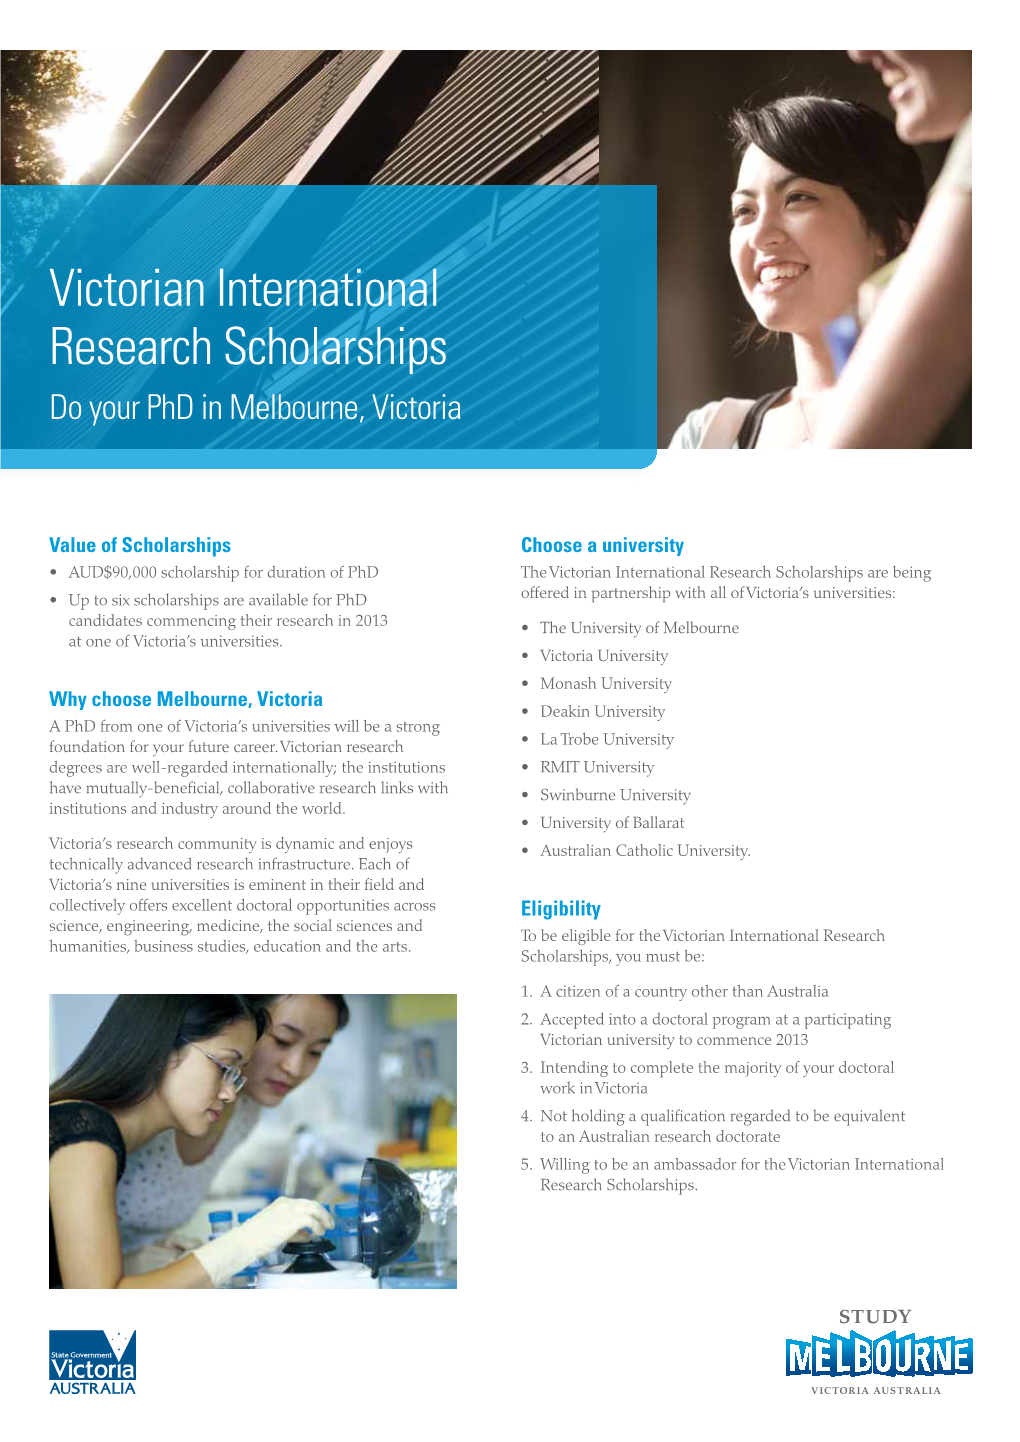 Victorian International Research Scholarships Do Your Phd in Melbourne, Victoria